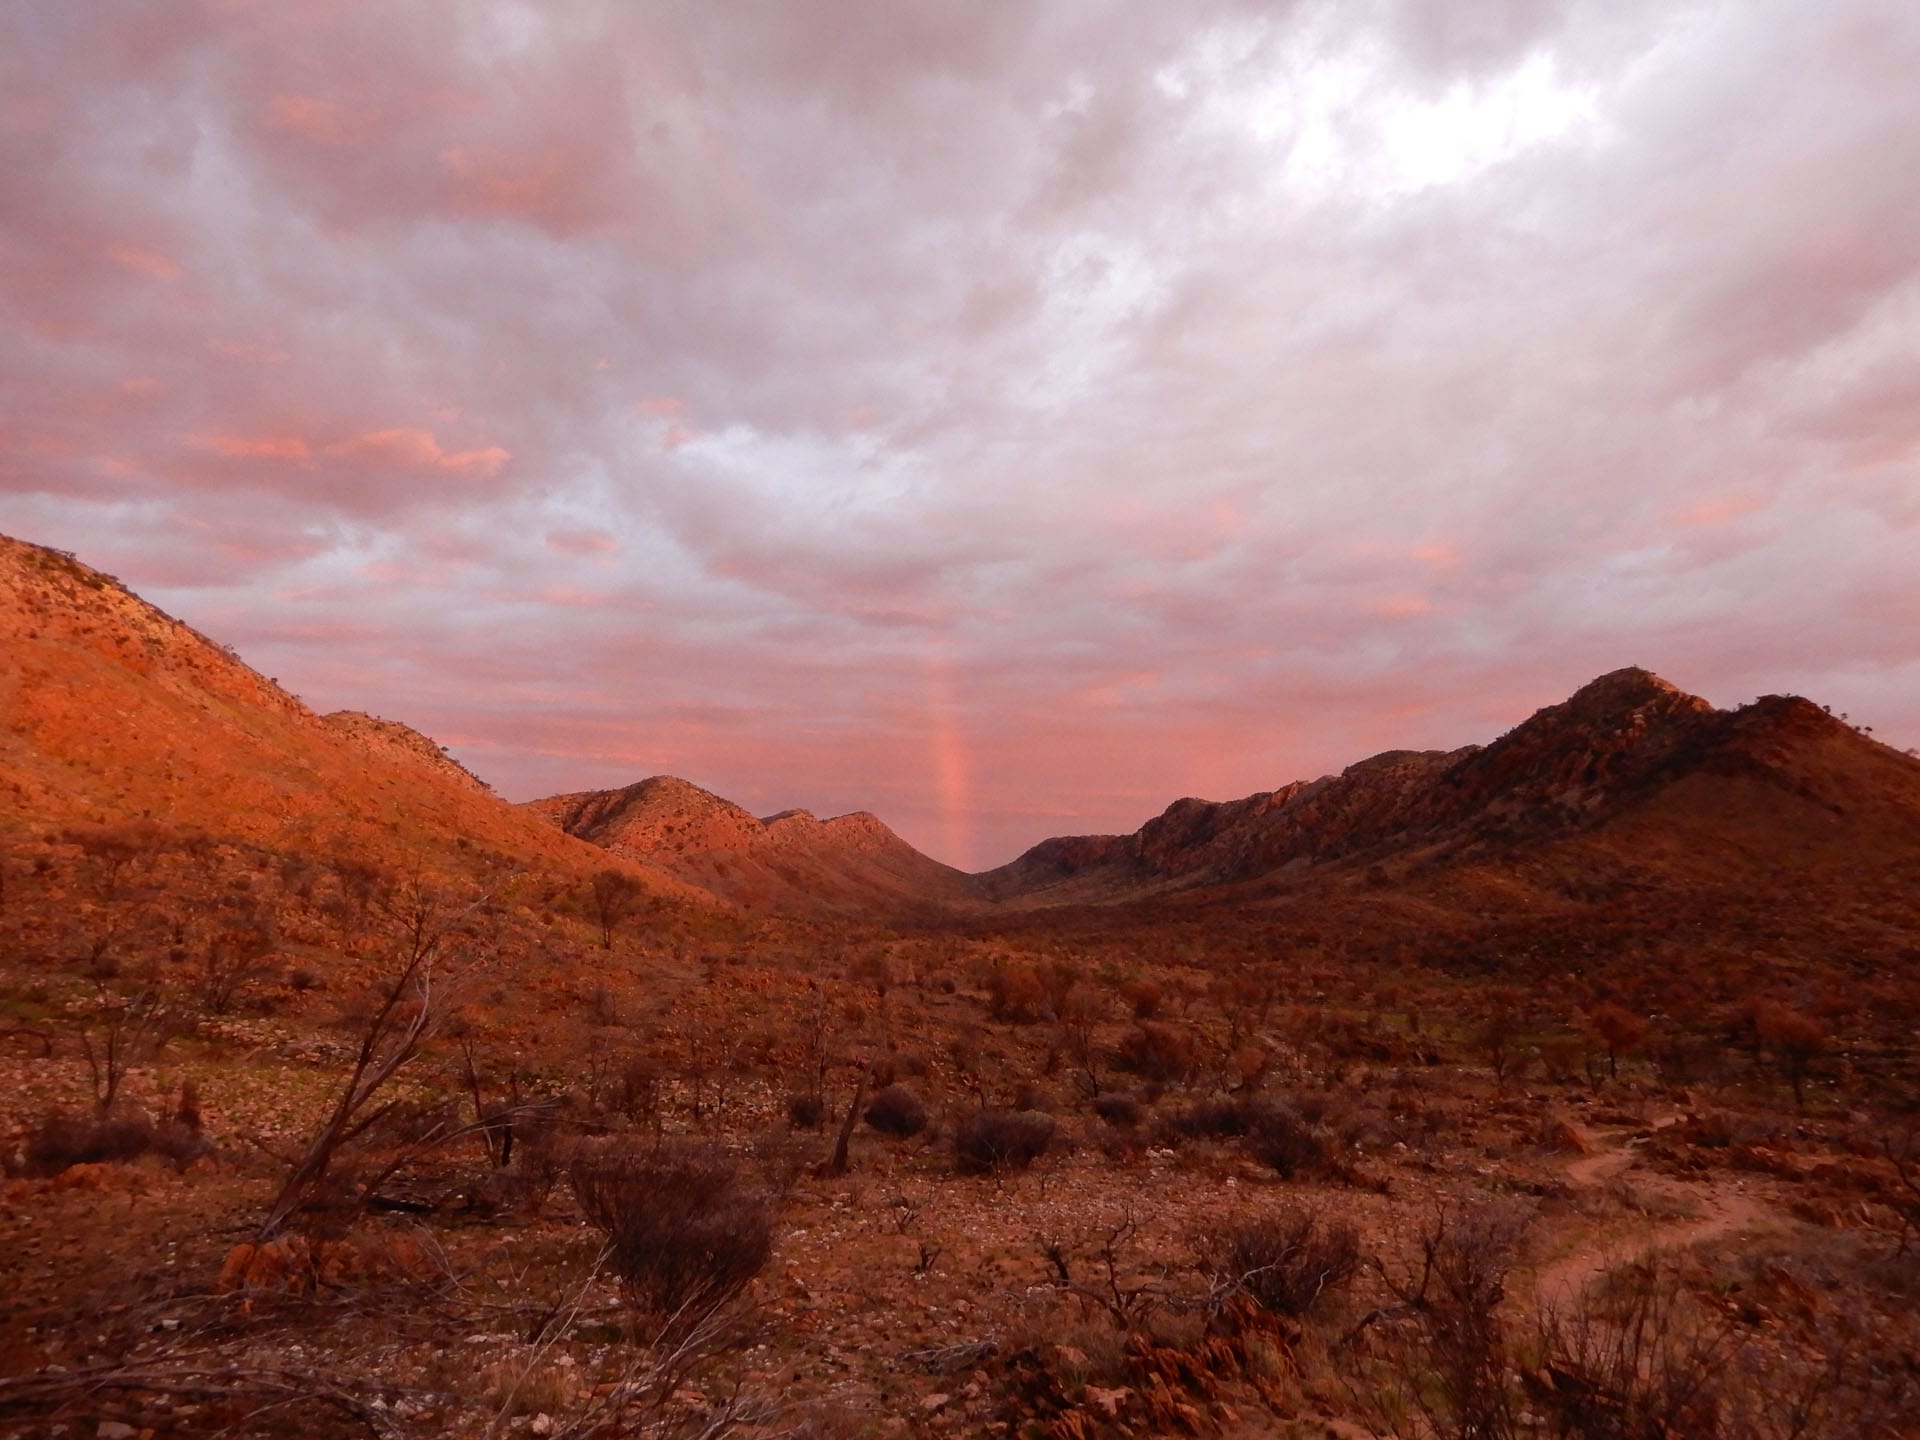 The ‘Big 3’ Hikes of the NT: How Do They Compare?, hiking, northern territory, larapinta trail, mountains, indigenous culture, multi-day hike, rainbow above the mountain ranges on the larapinta trail